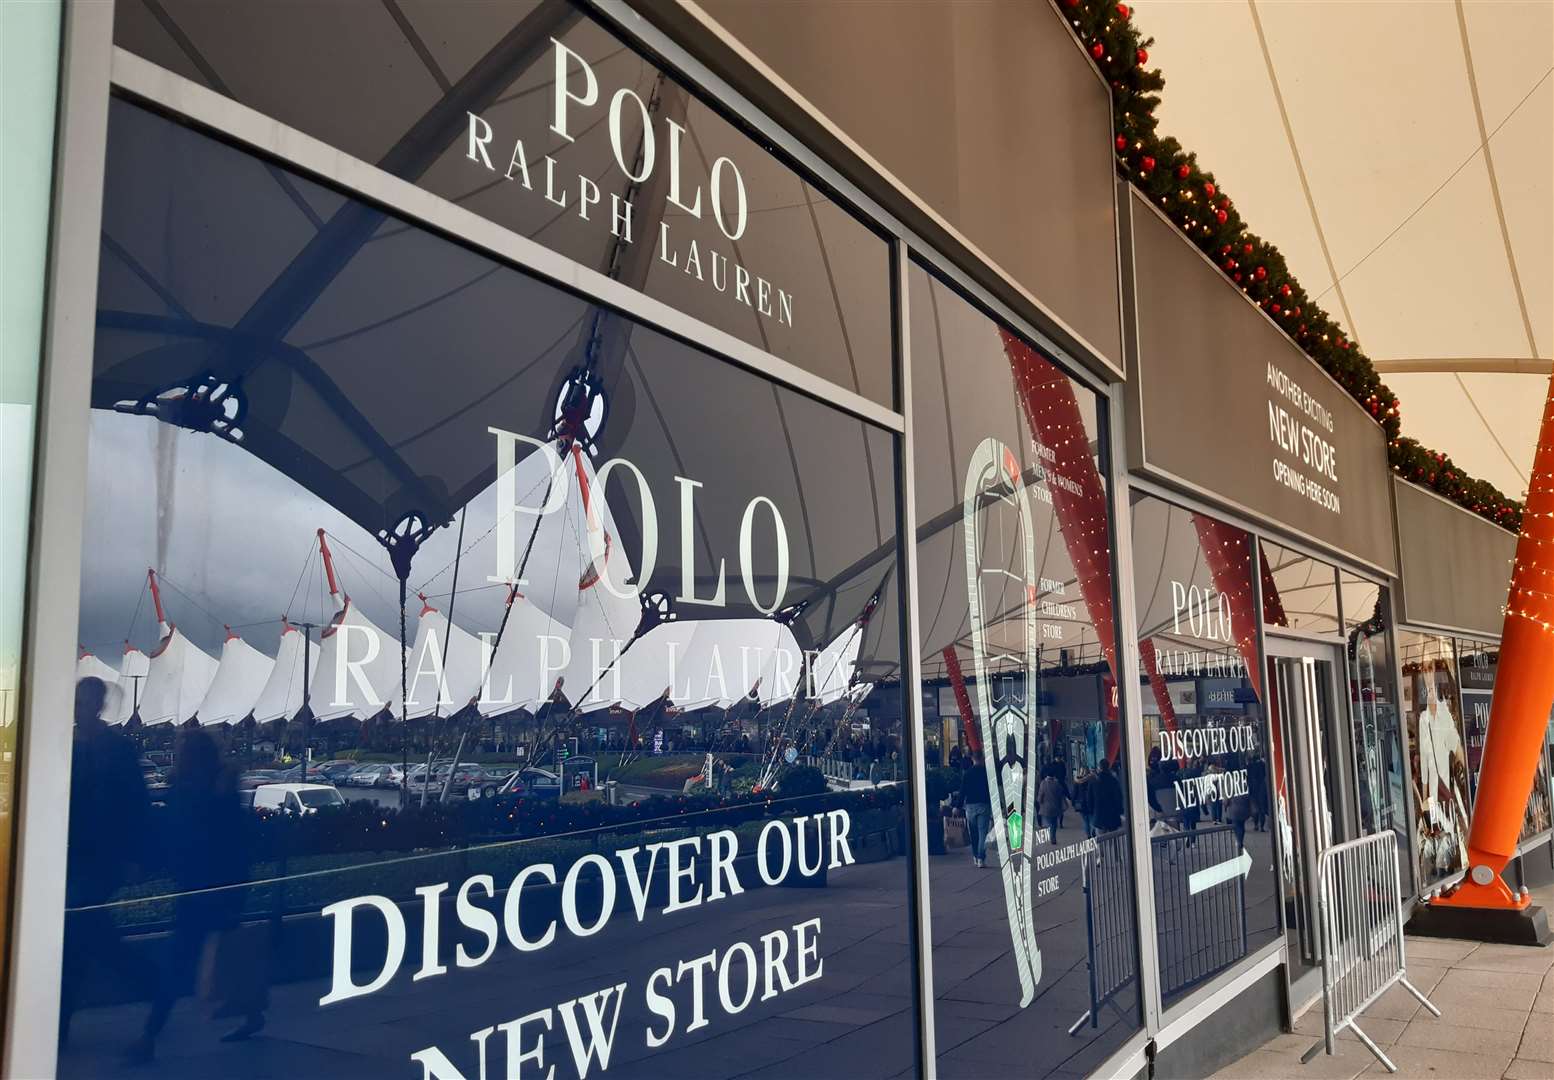 Adidas is set to take on the unit which was previously filled by Polo Ralph Lauren